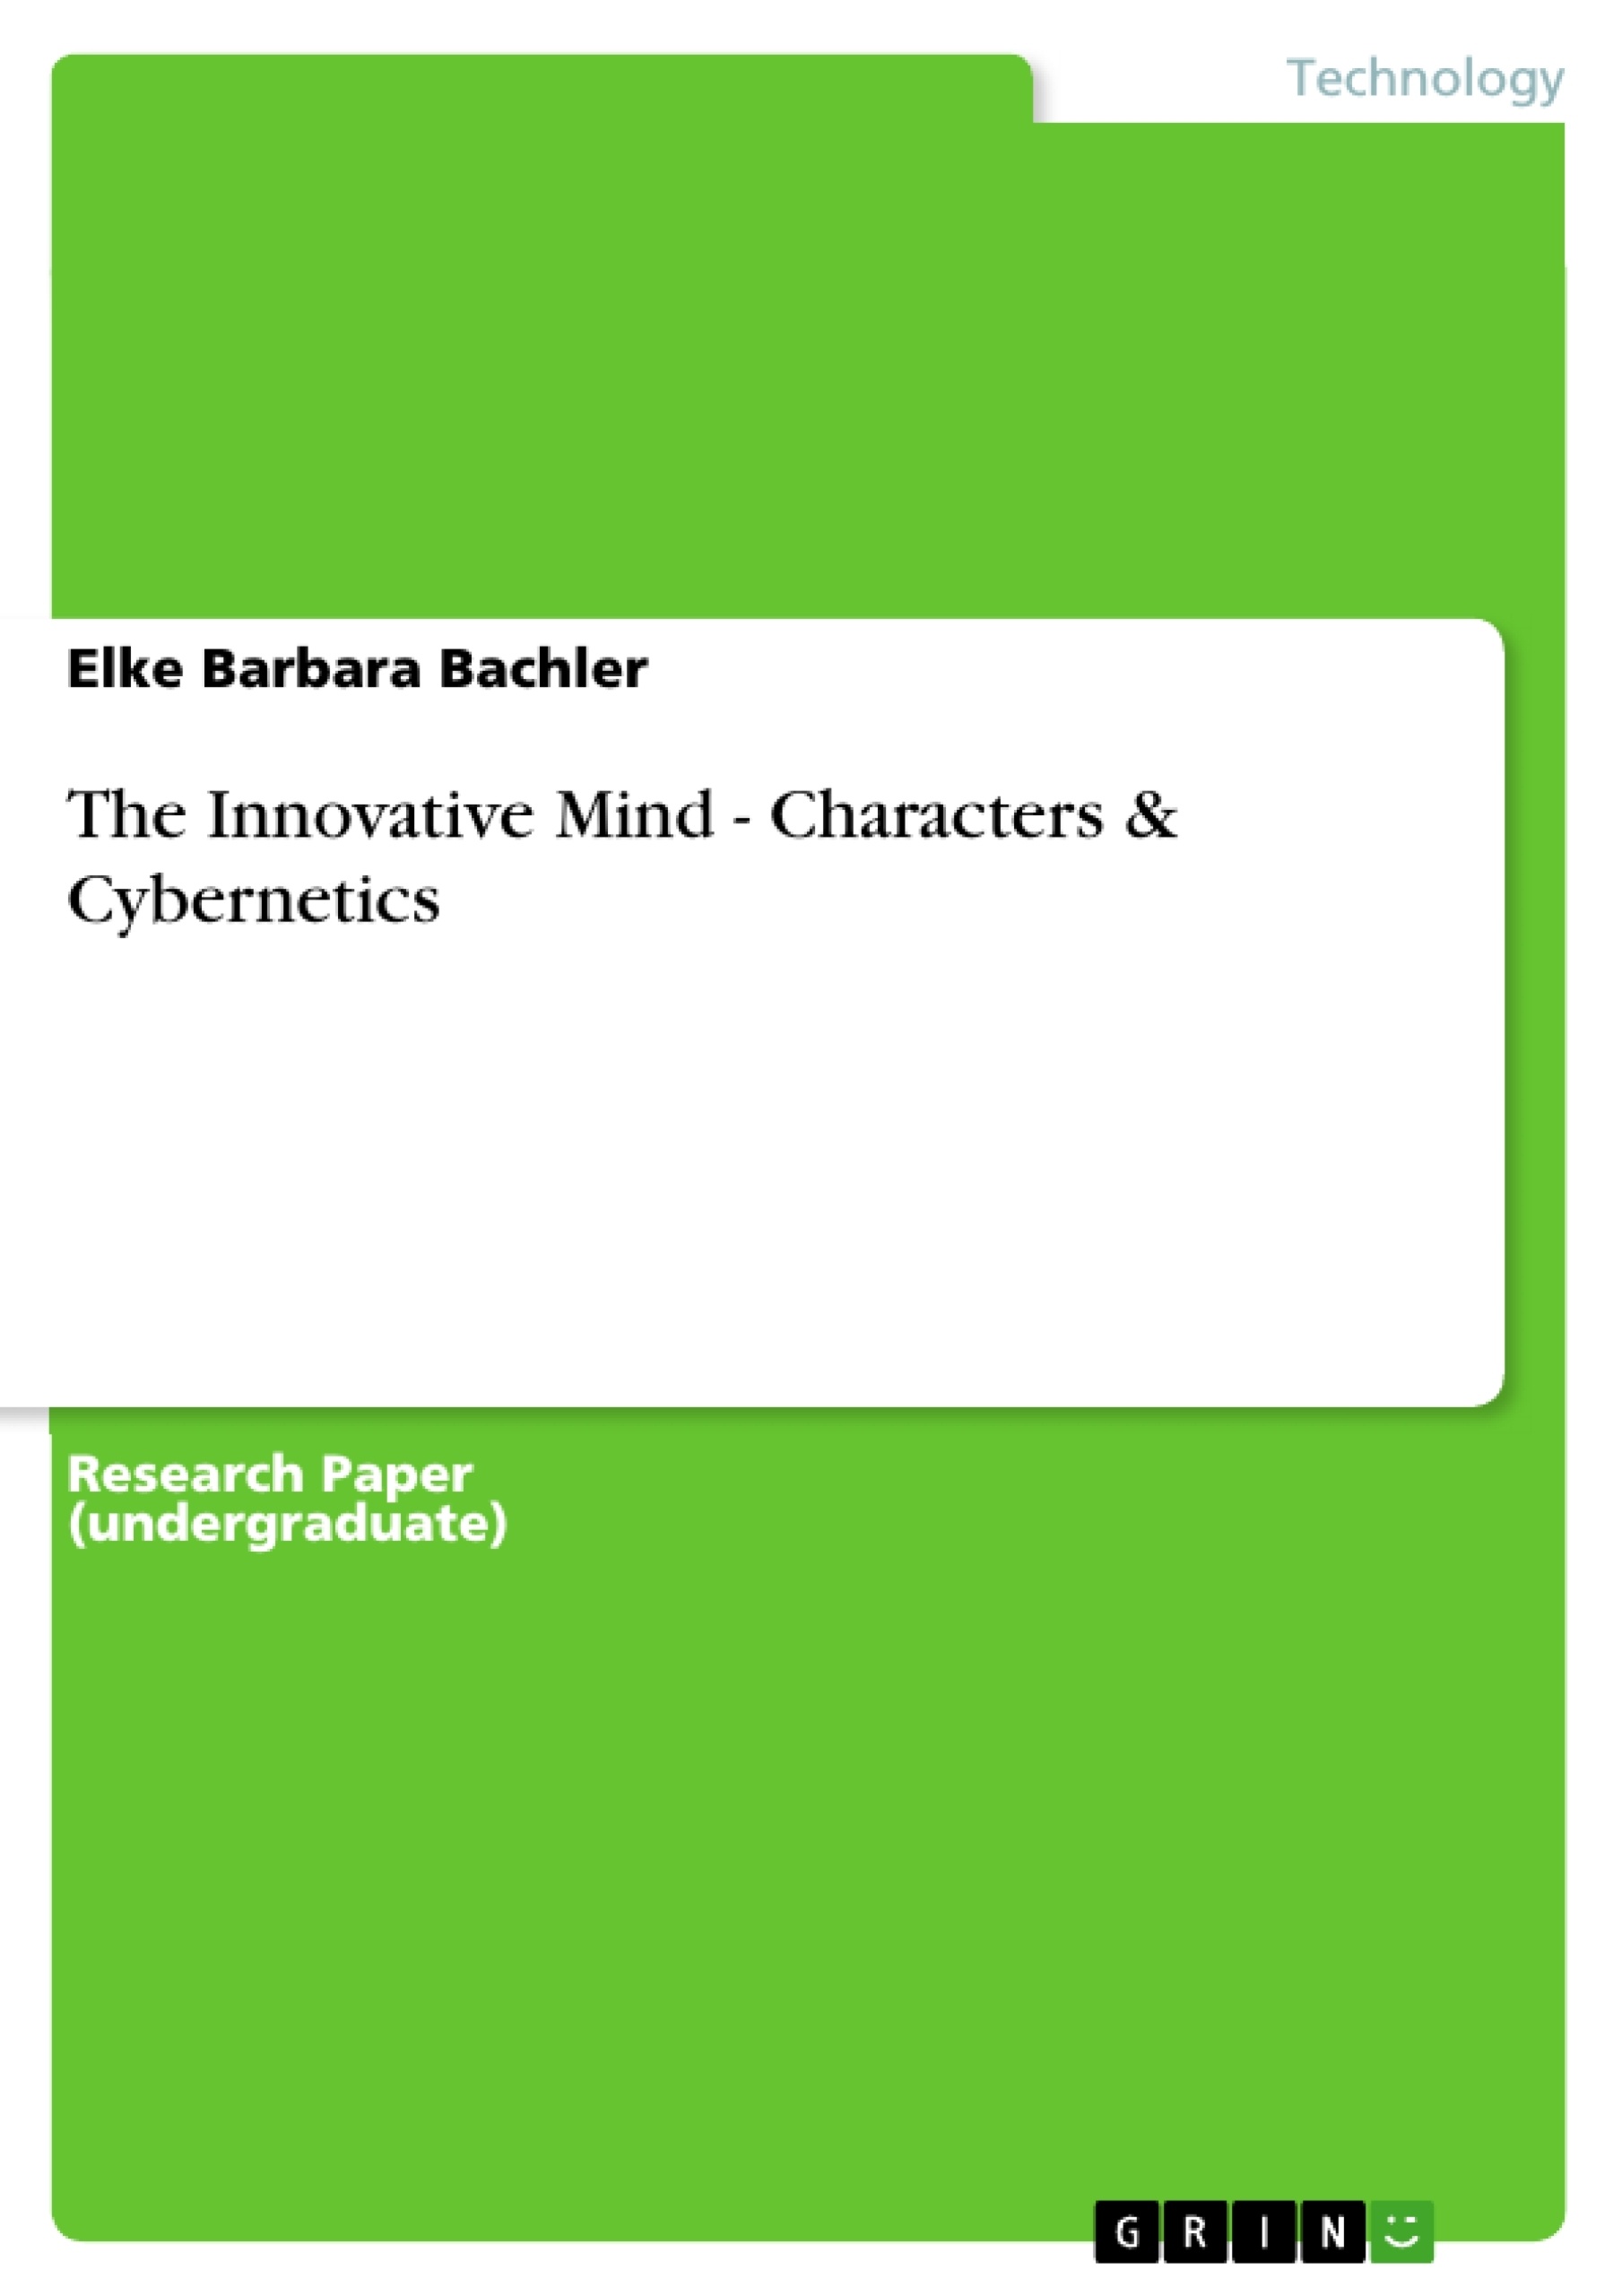 Title: The Innovative Mind - Characters & Cybernetics